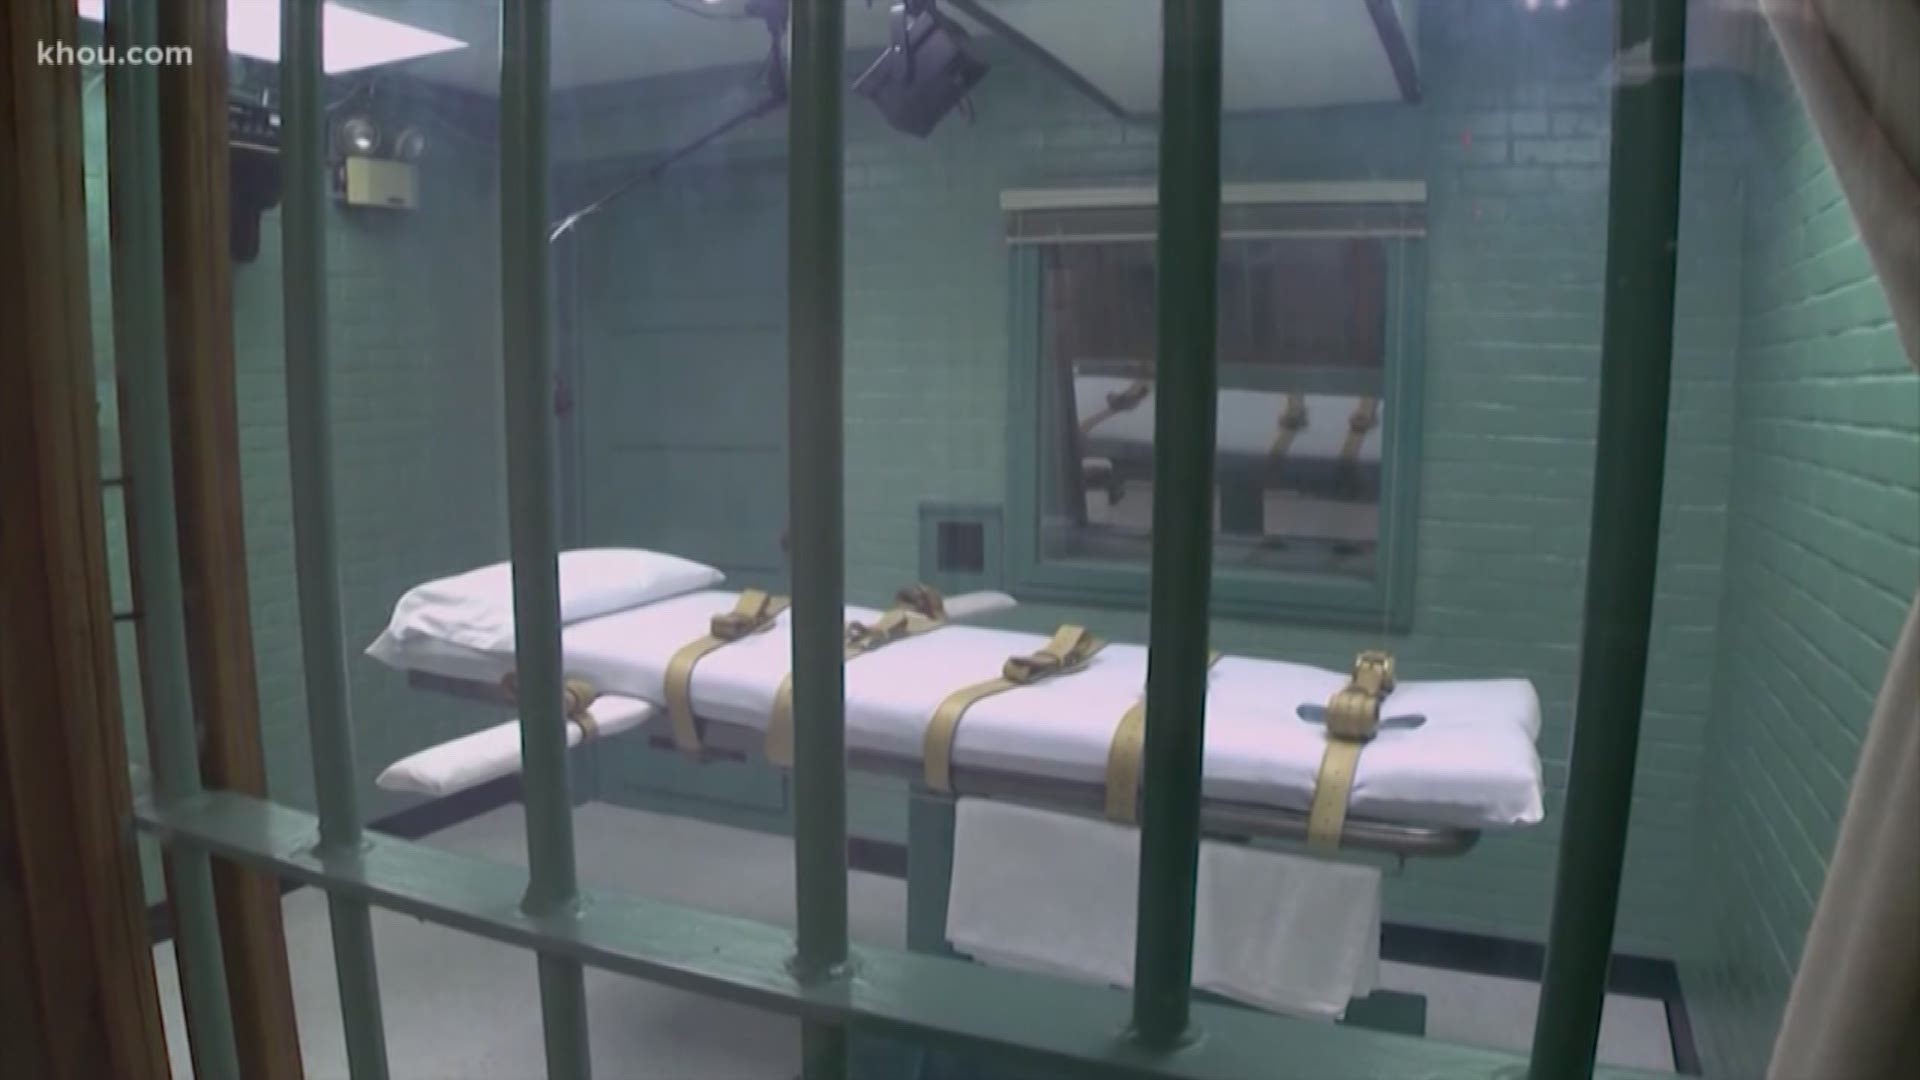 Senator John Whitmire wants to put an end to all final death row statements. This is the same senator who made it so death row inmates can't choose their last meal.